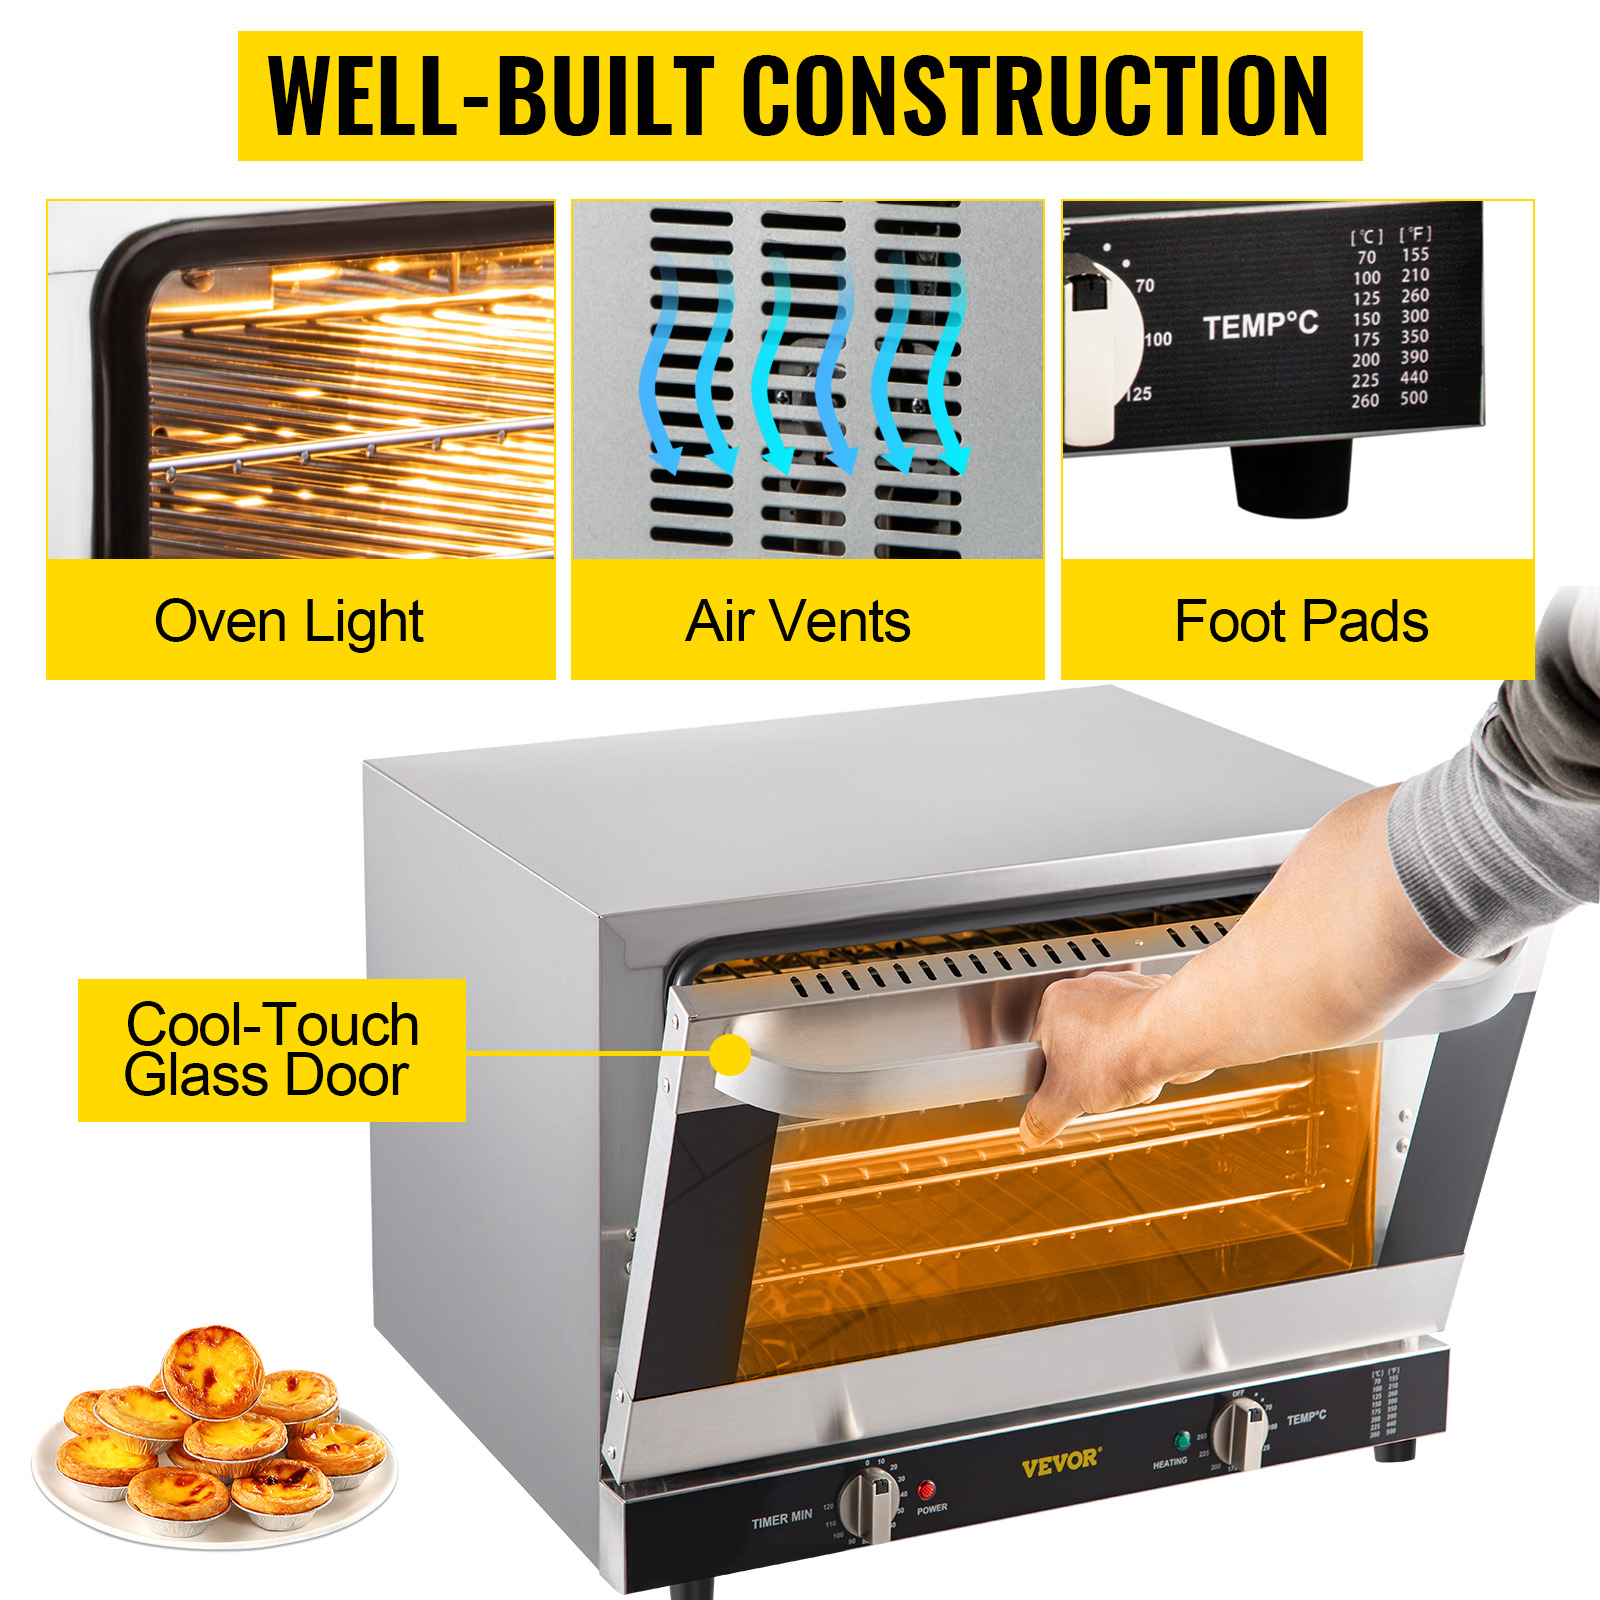 https://d2qc09rl1gfuof.cloudfront.net/product/RFXHLM68L110V42FZ/commercial-convection-oven-m100-5.jpg